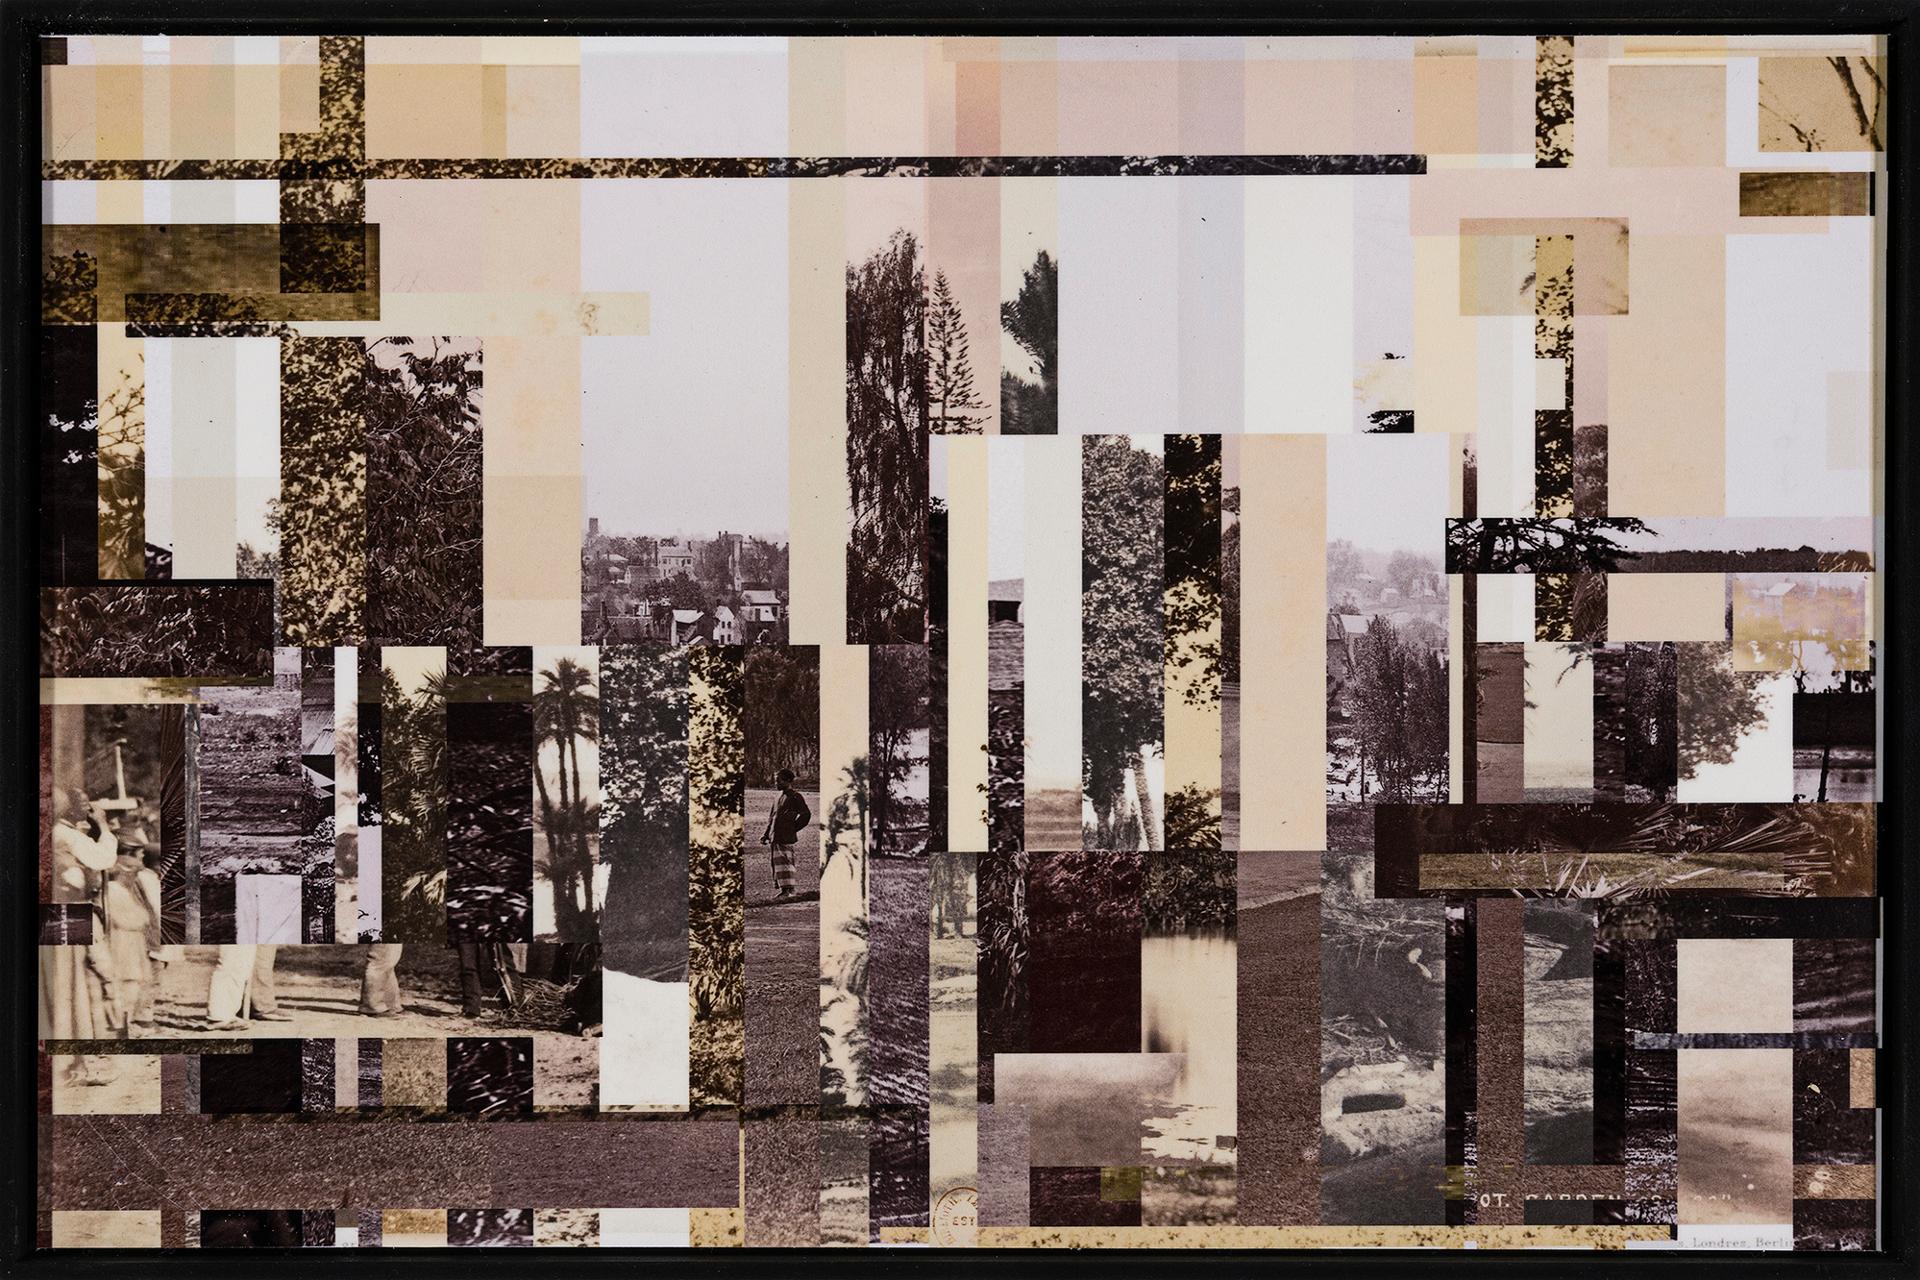 Adam Basanta - Collaged 19th Century Photographic Landscapes with Trees, Palms and Observers, 2019